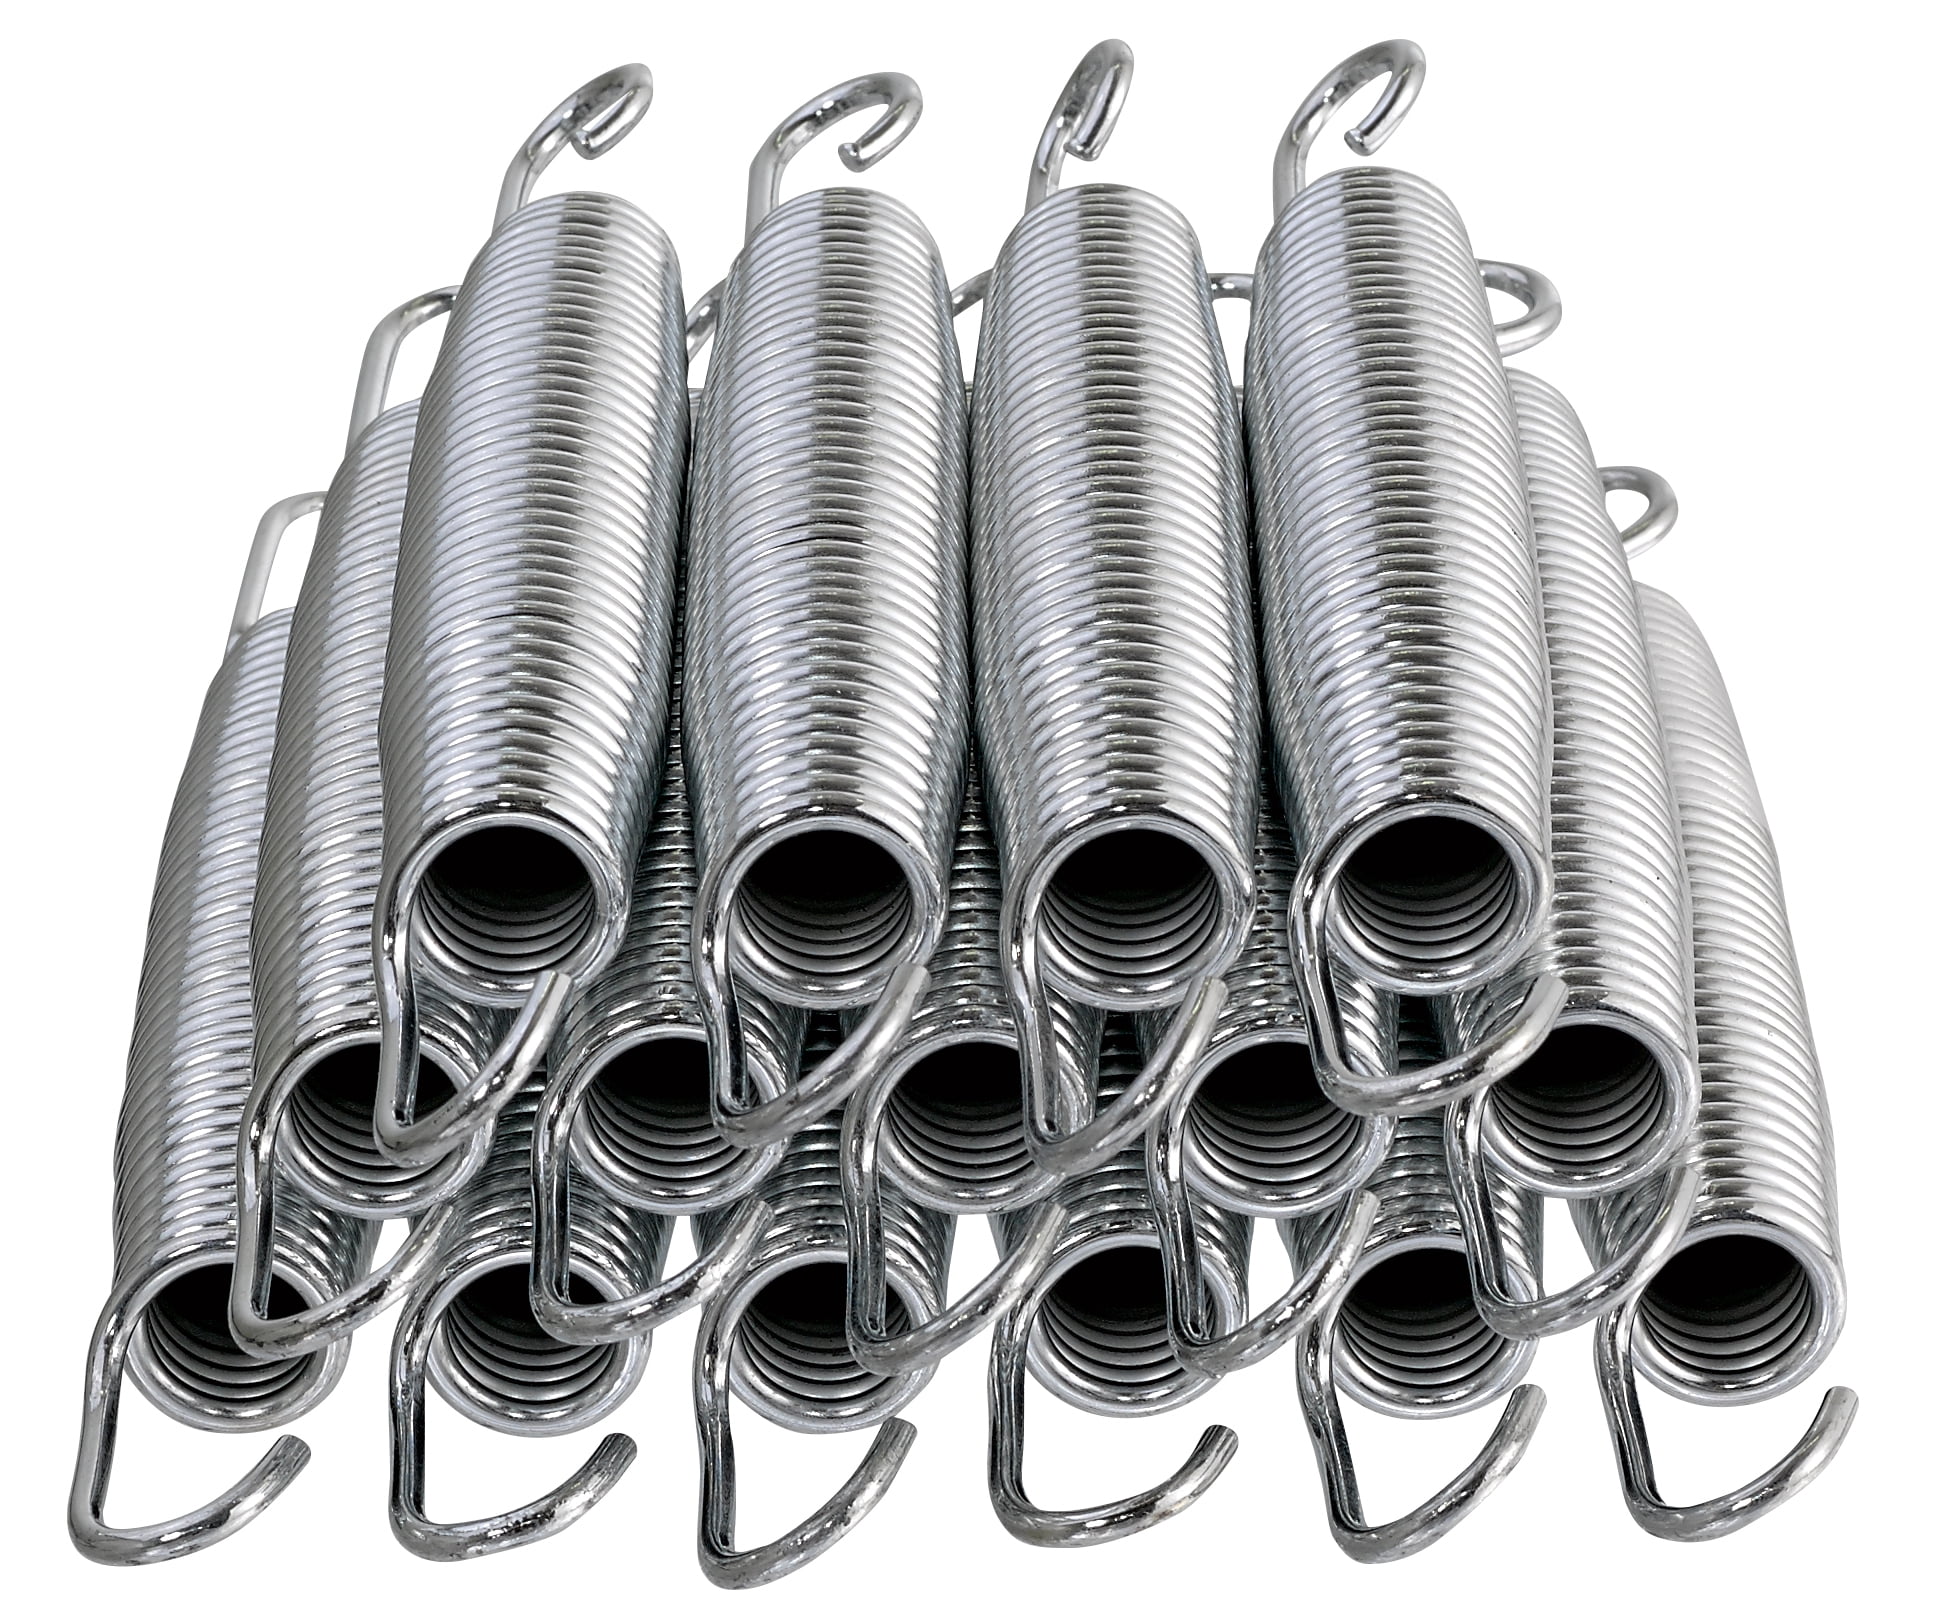 5.5" Trampoline Springs Heavy-Duty Galvanized Steel Replacement Springs 100pcs 